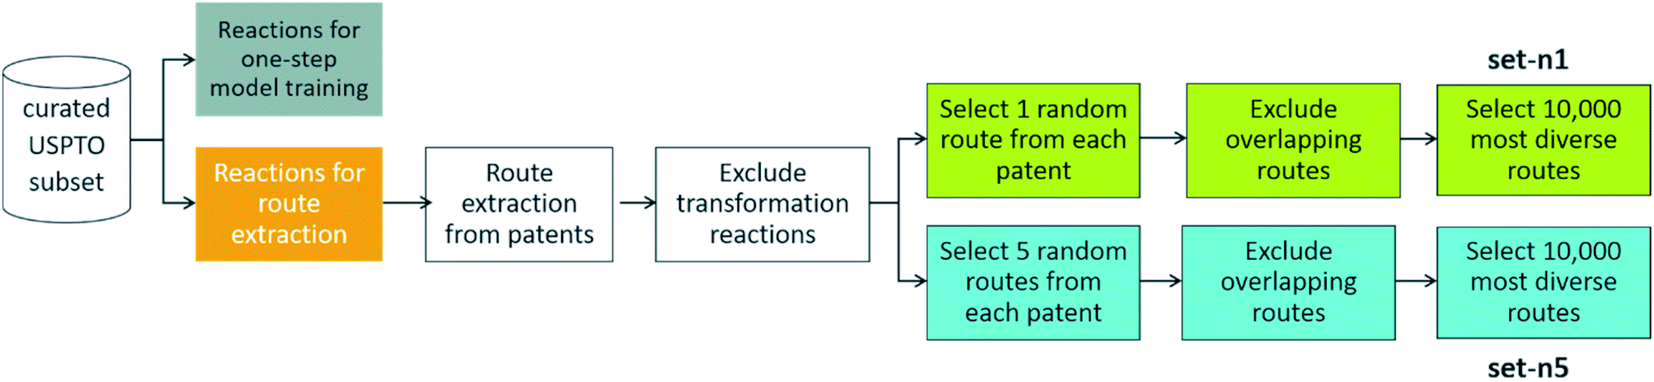 PaRoutes: towards a framework for benchmarking retrosynthesis route  predictions - Digital Discovery (RSC Publishing) DOI:10.1039/D2DD00015F